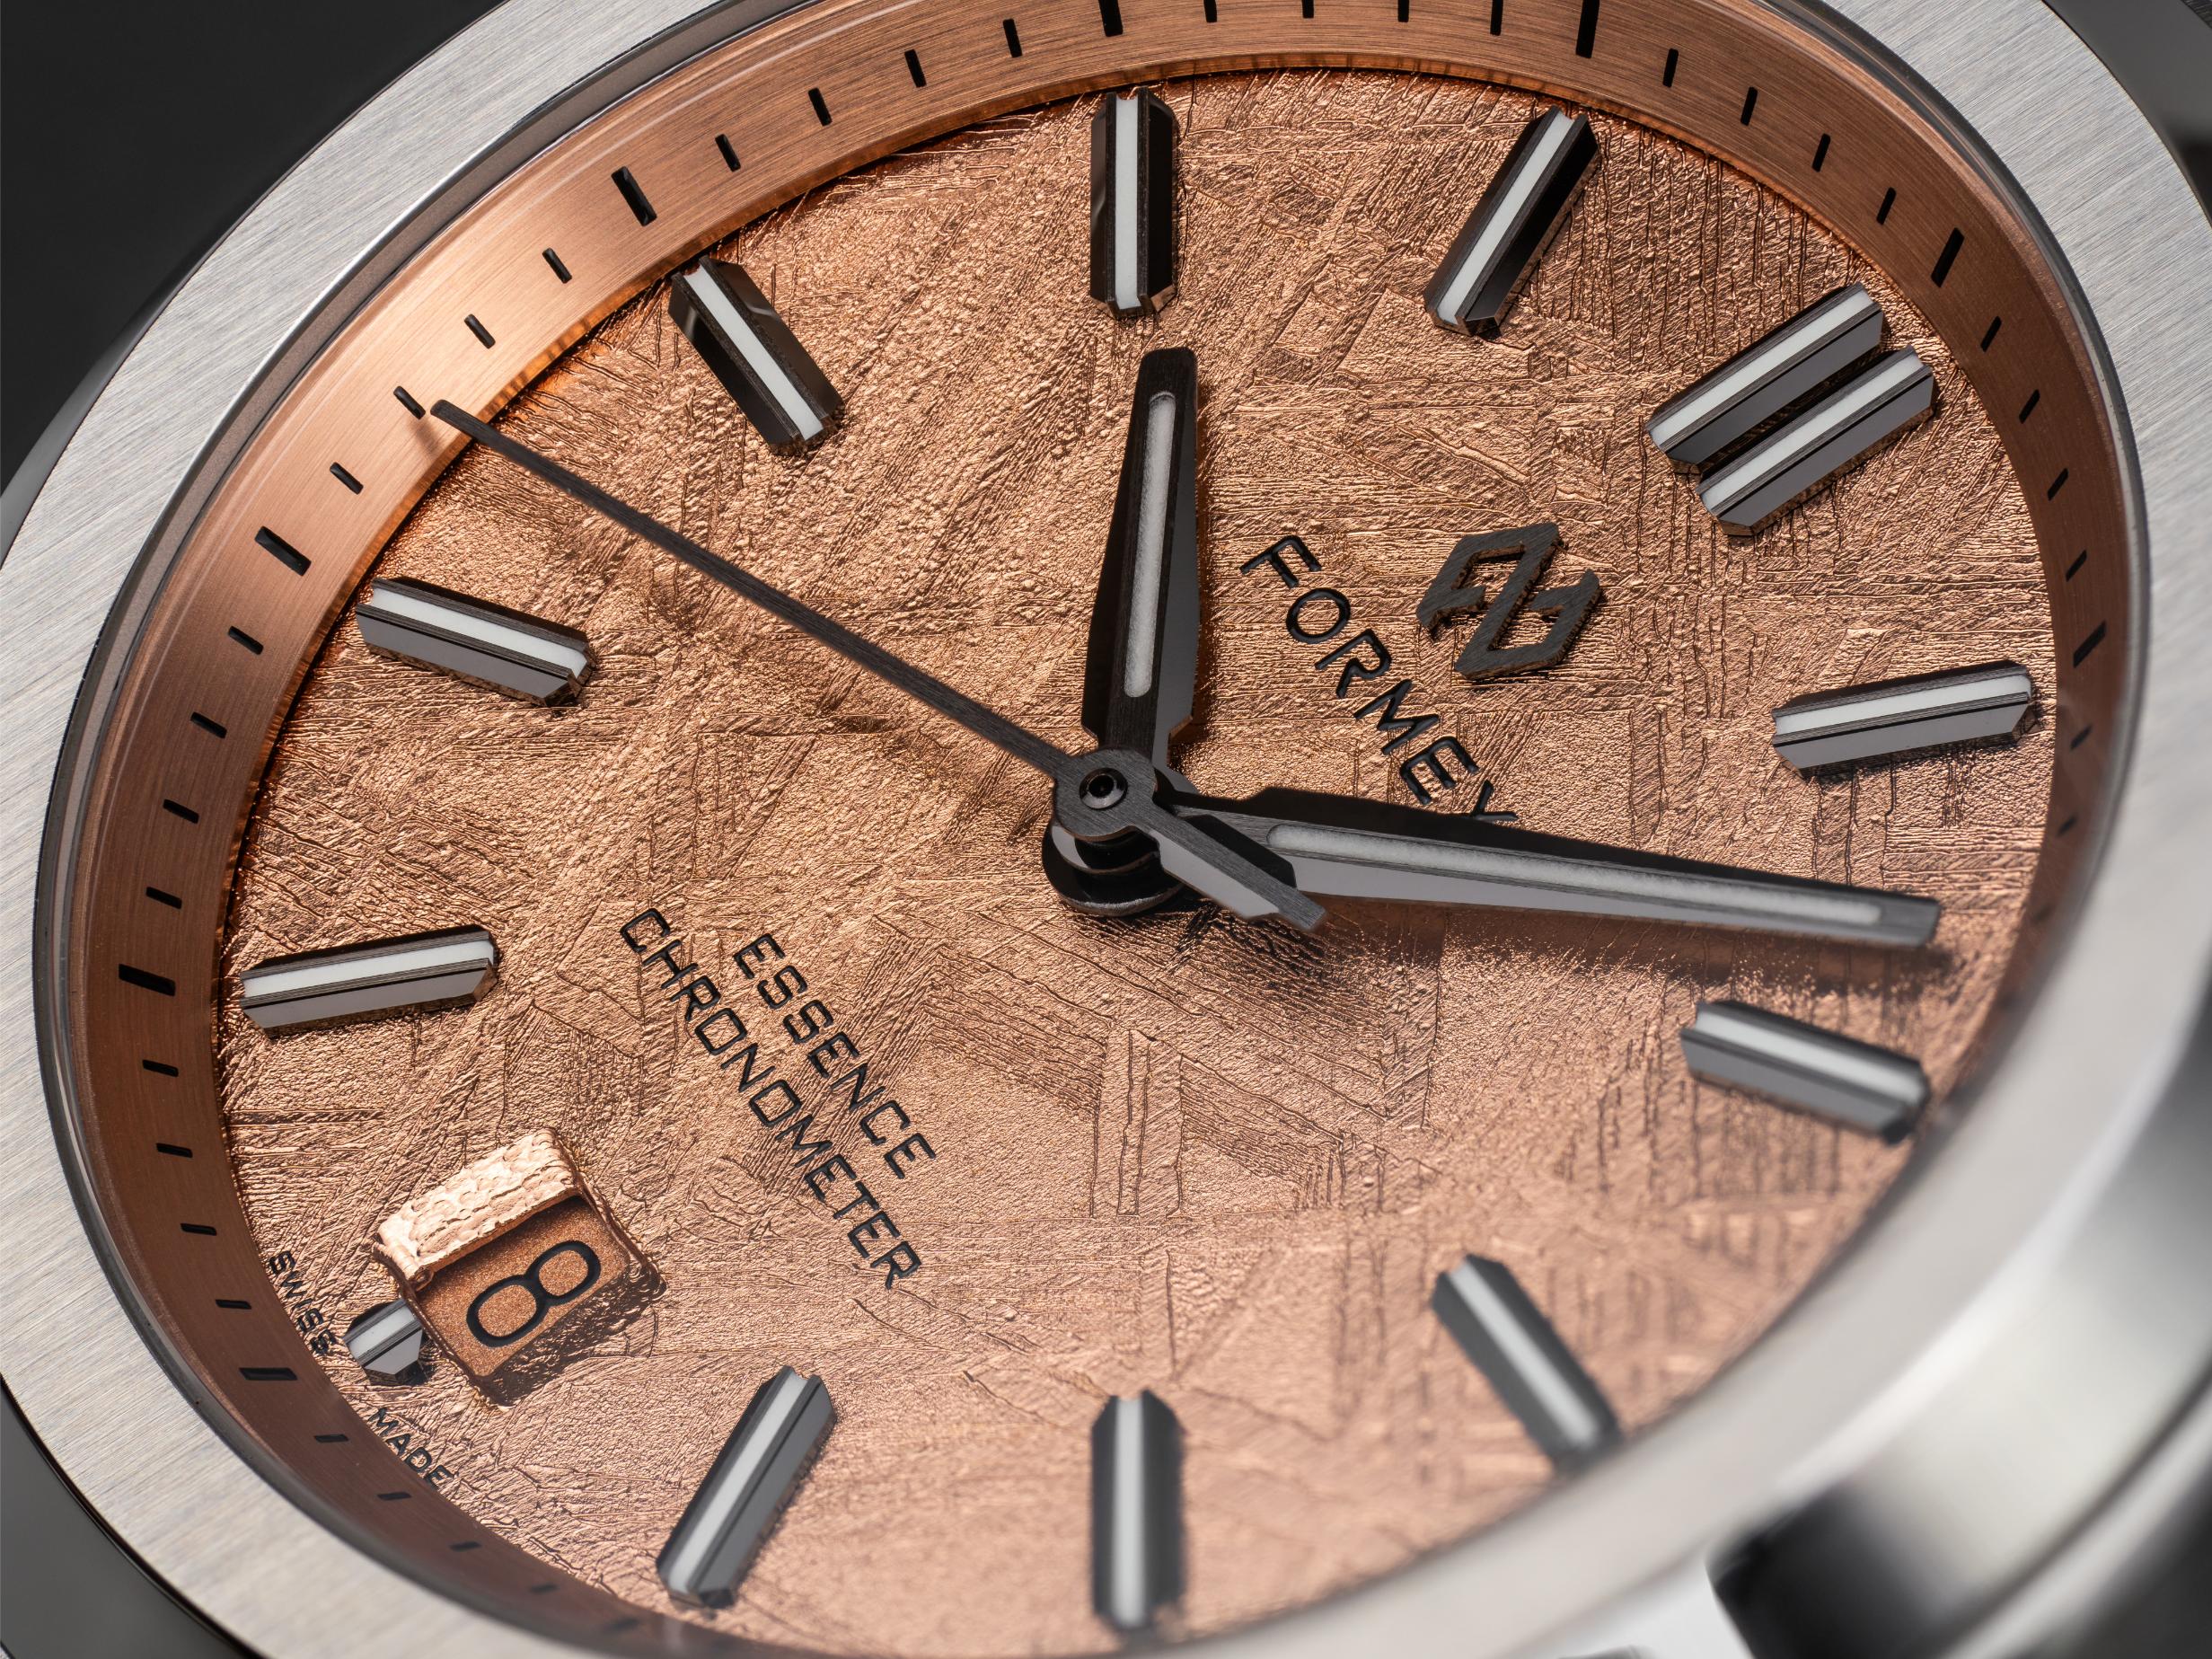 Formex Essence 39 mm Space Gold Automatic COSC - Dial Close Up